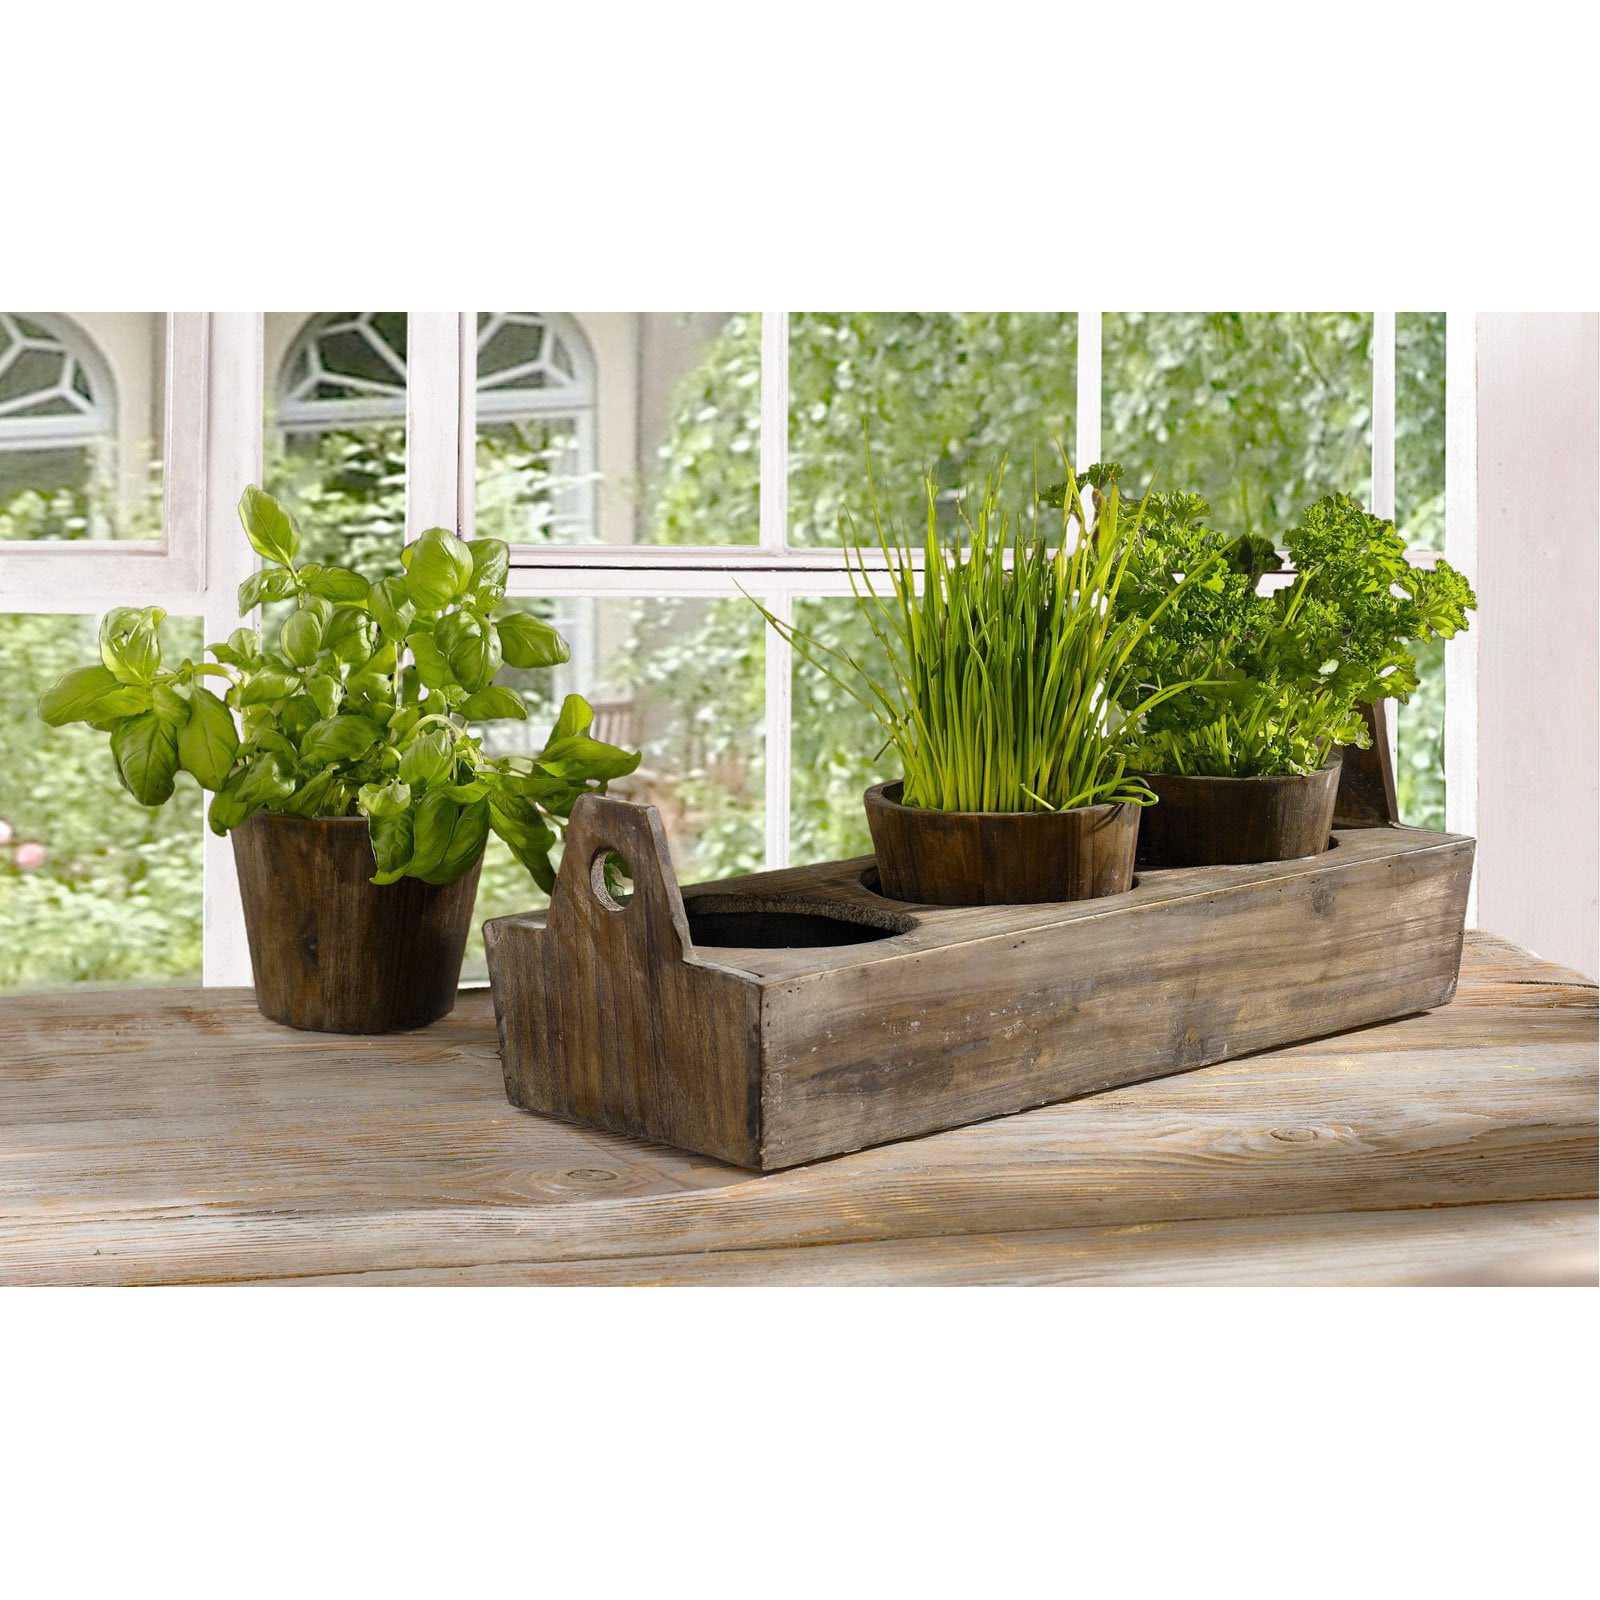 Wooden Distressed Butlers Tray Planter Plant Flower Pot Herb Holder 